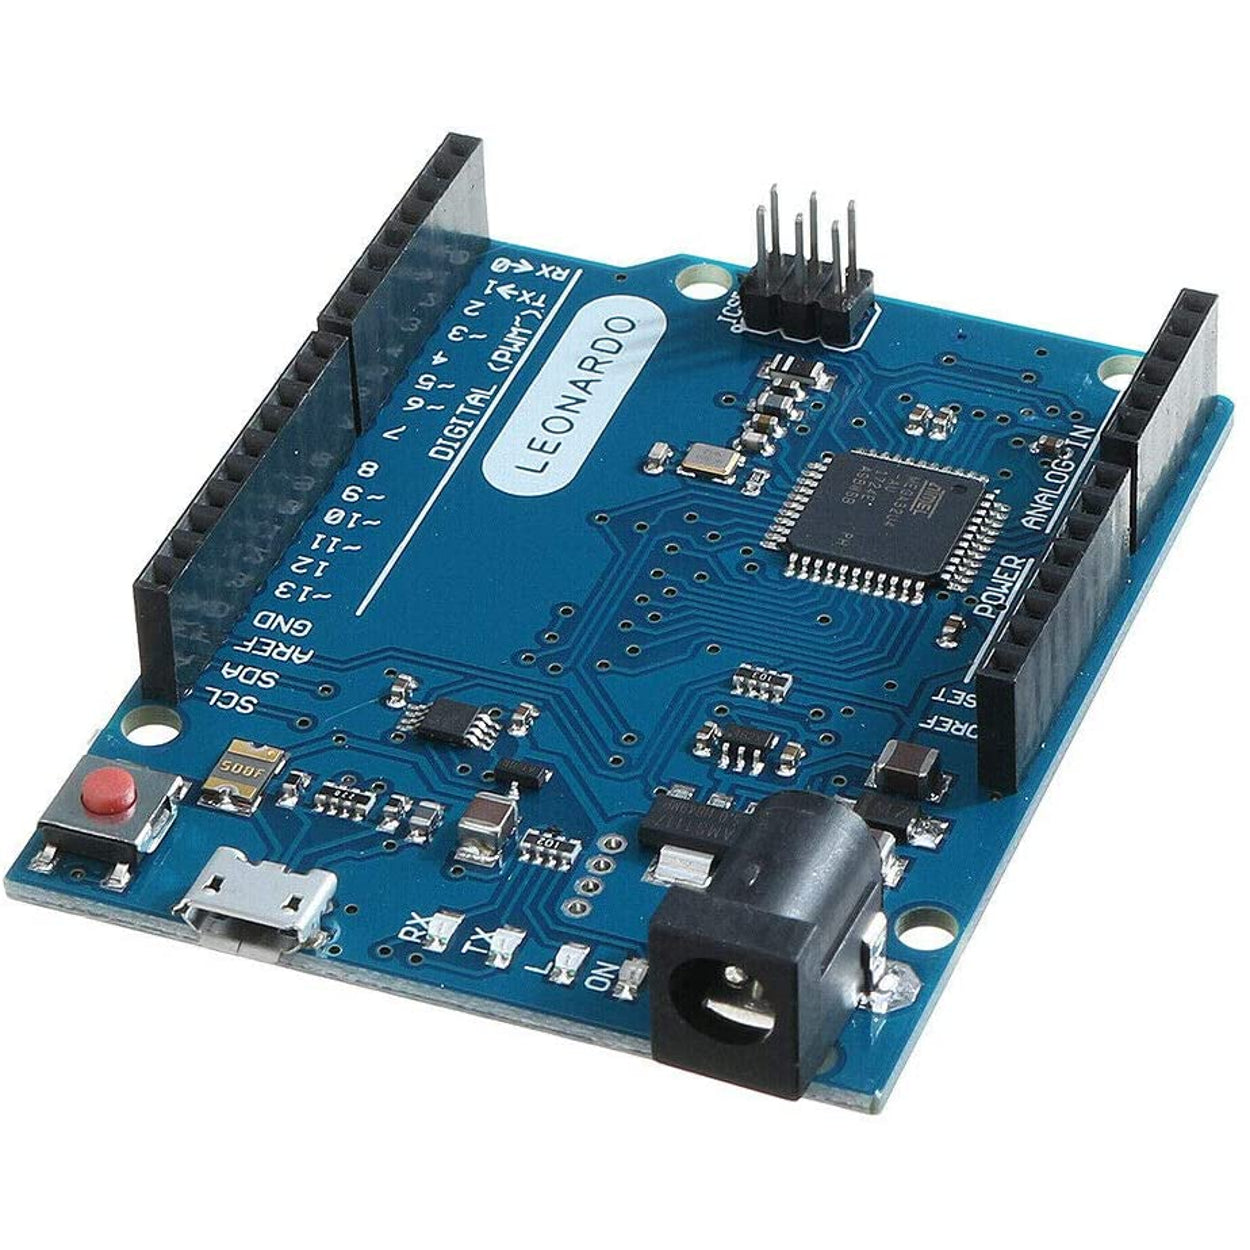 Leonardo R3 Board Micro-USB compatible Without USB Cable